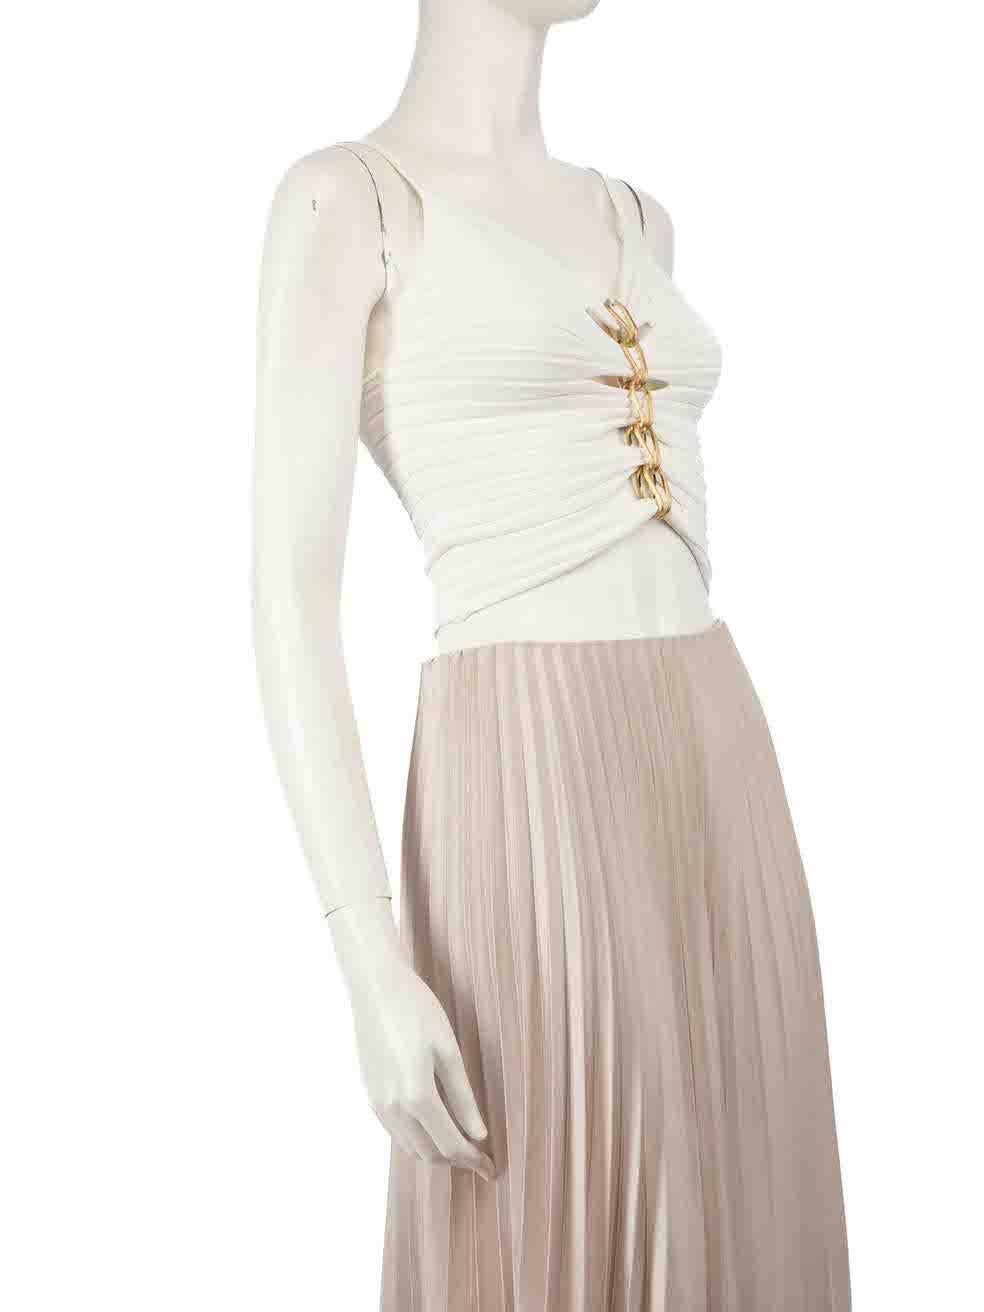 CONDITION is Very good. Minimal wear to top is evident. Minimal tarnishing to third chain hardware on this used Dion Lee designer resale item.
 
 
 
 Details
 
 
 White
 
 Viscose
 
 Top
 
 Sleeveless
 
 Front chain detail
 
 Cropped fit
 
 
 
 
 
